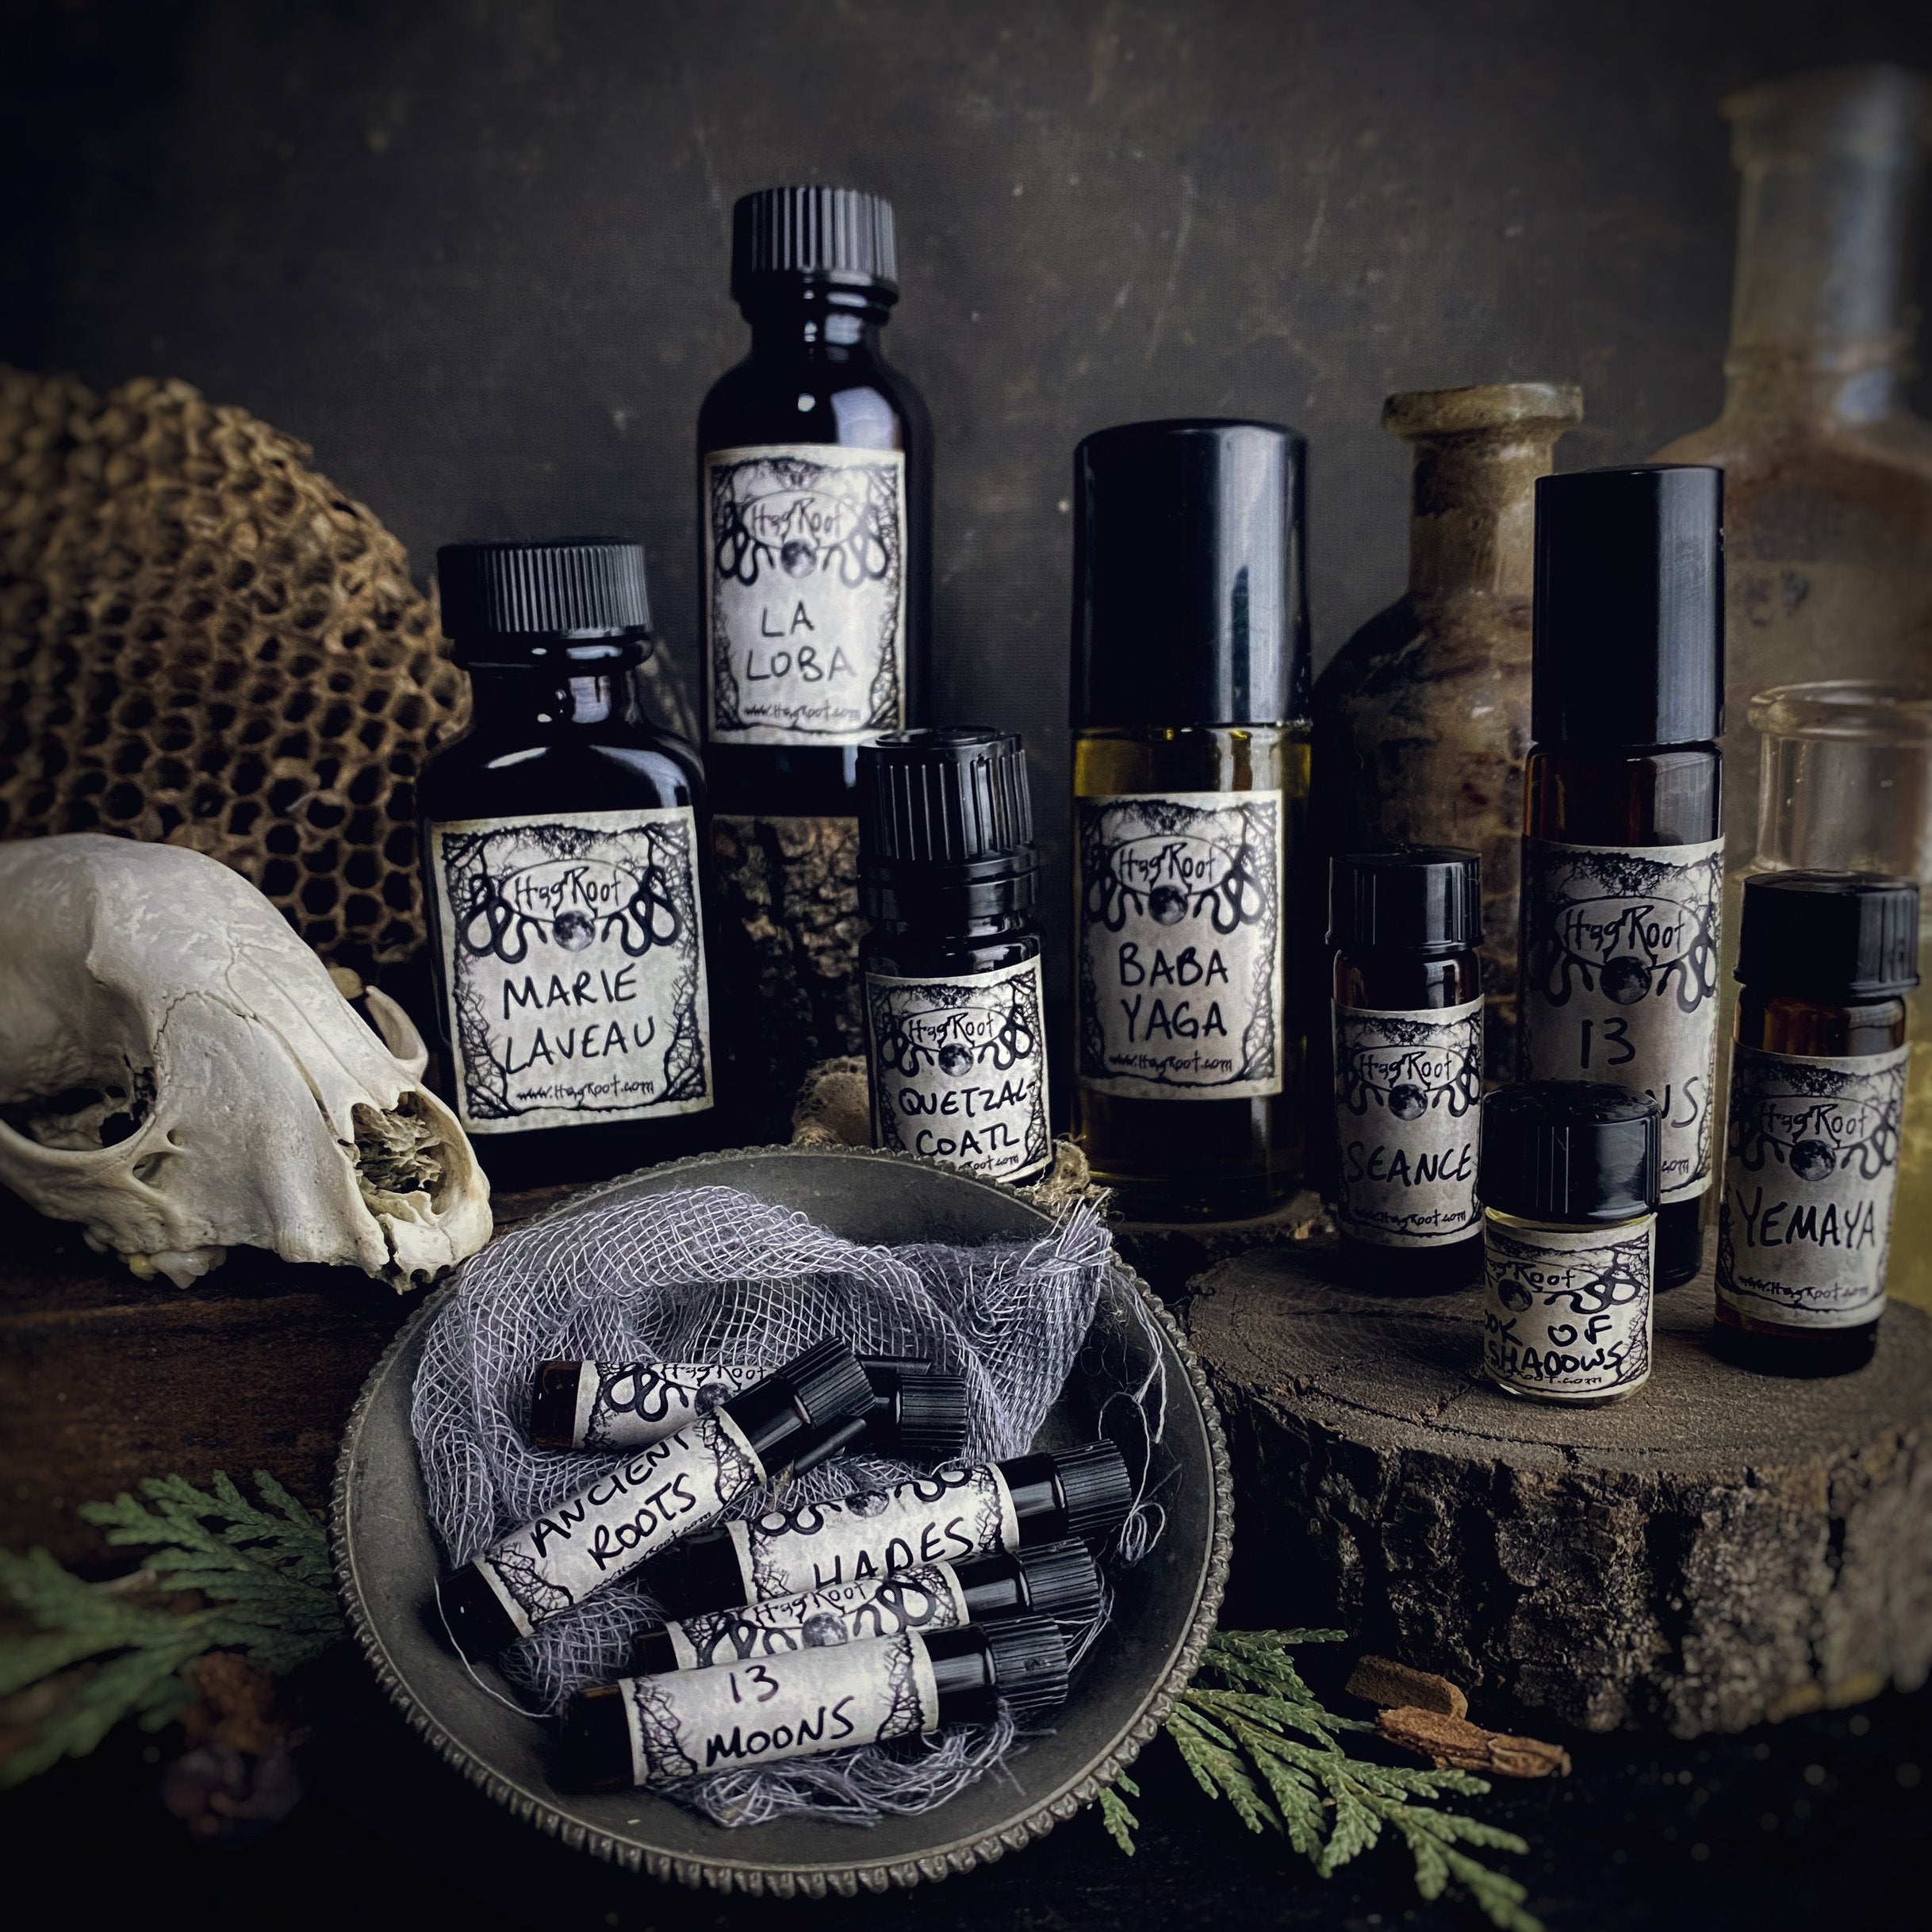 HEL-(Patchouli, Smoked Woods, Frankincense Tears, Amber, Haunting Sweetness)-Perfume, Cologne, Anointing, Ritual Oil